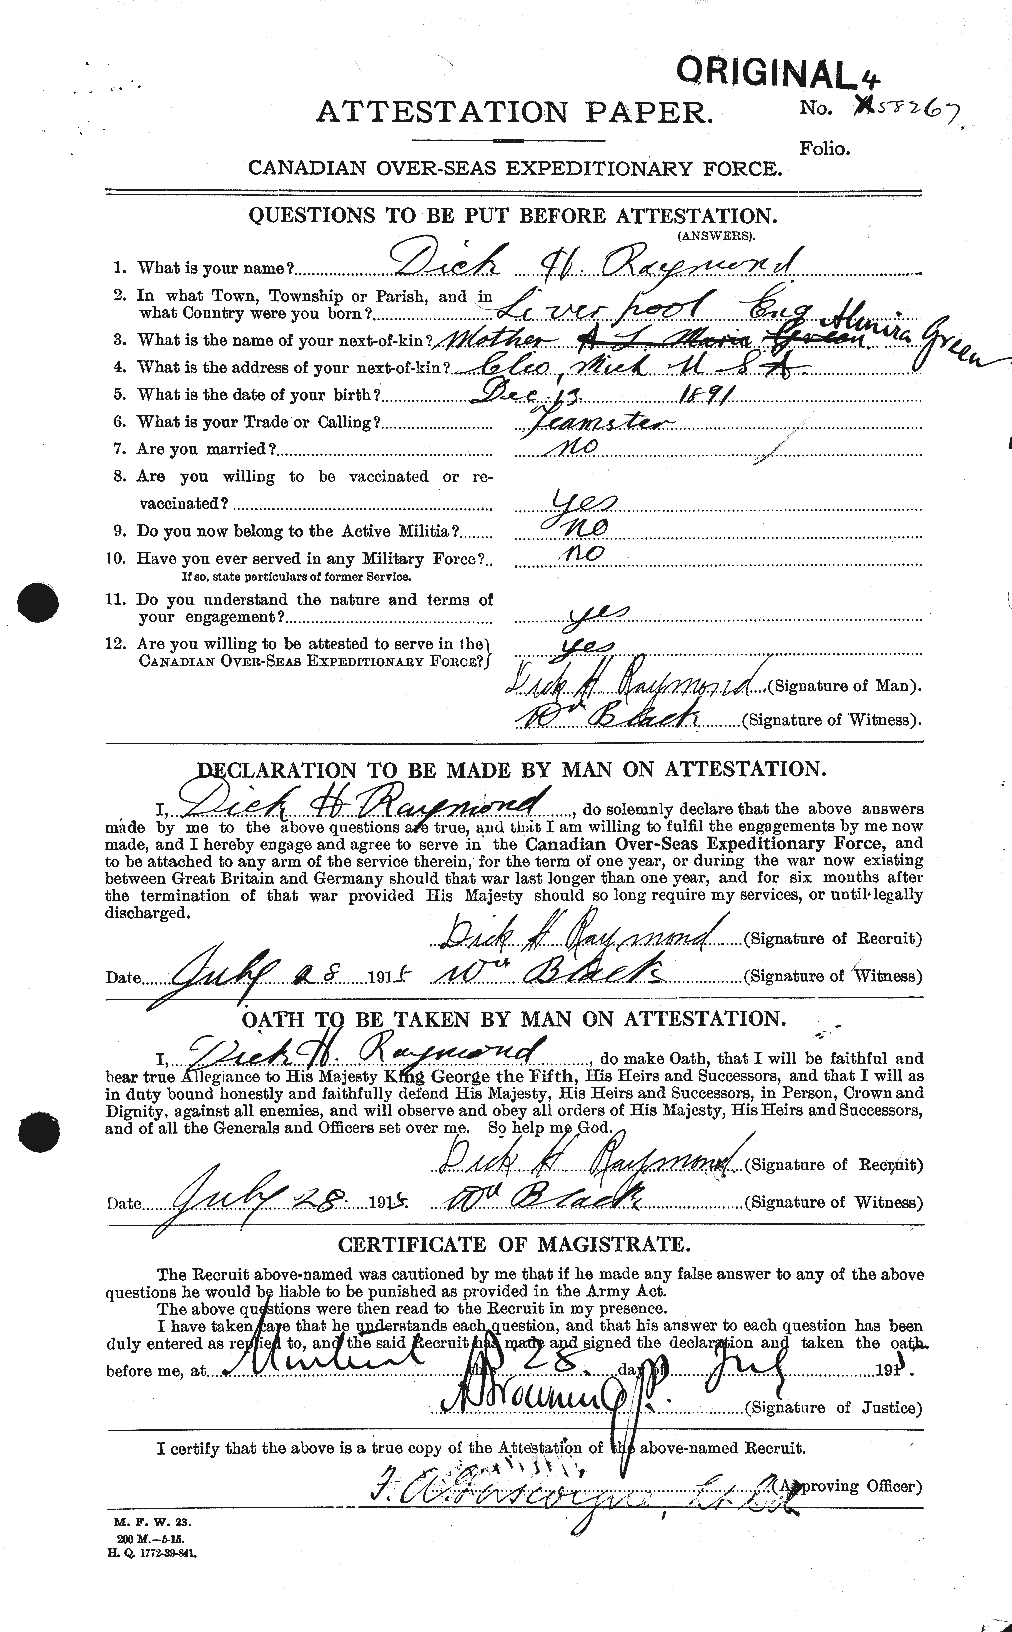 Personnel Records of the First World War - CEF 595295a